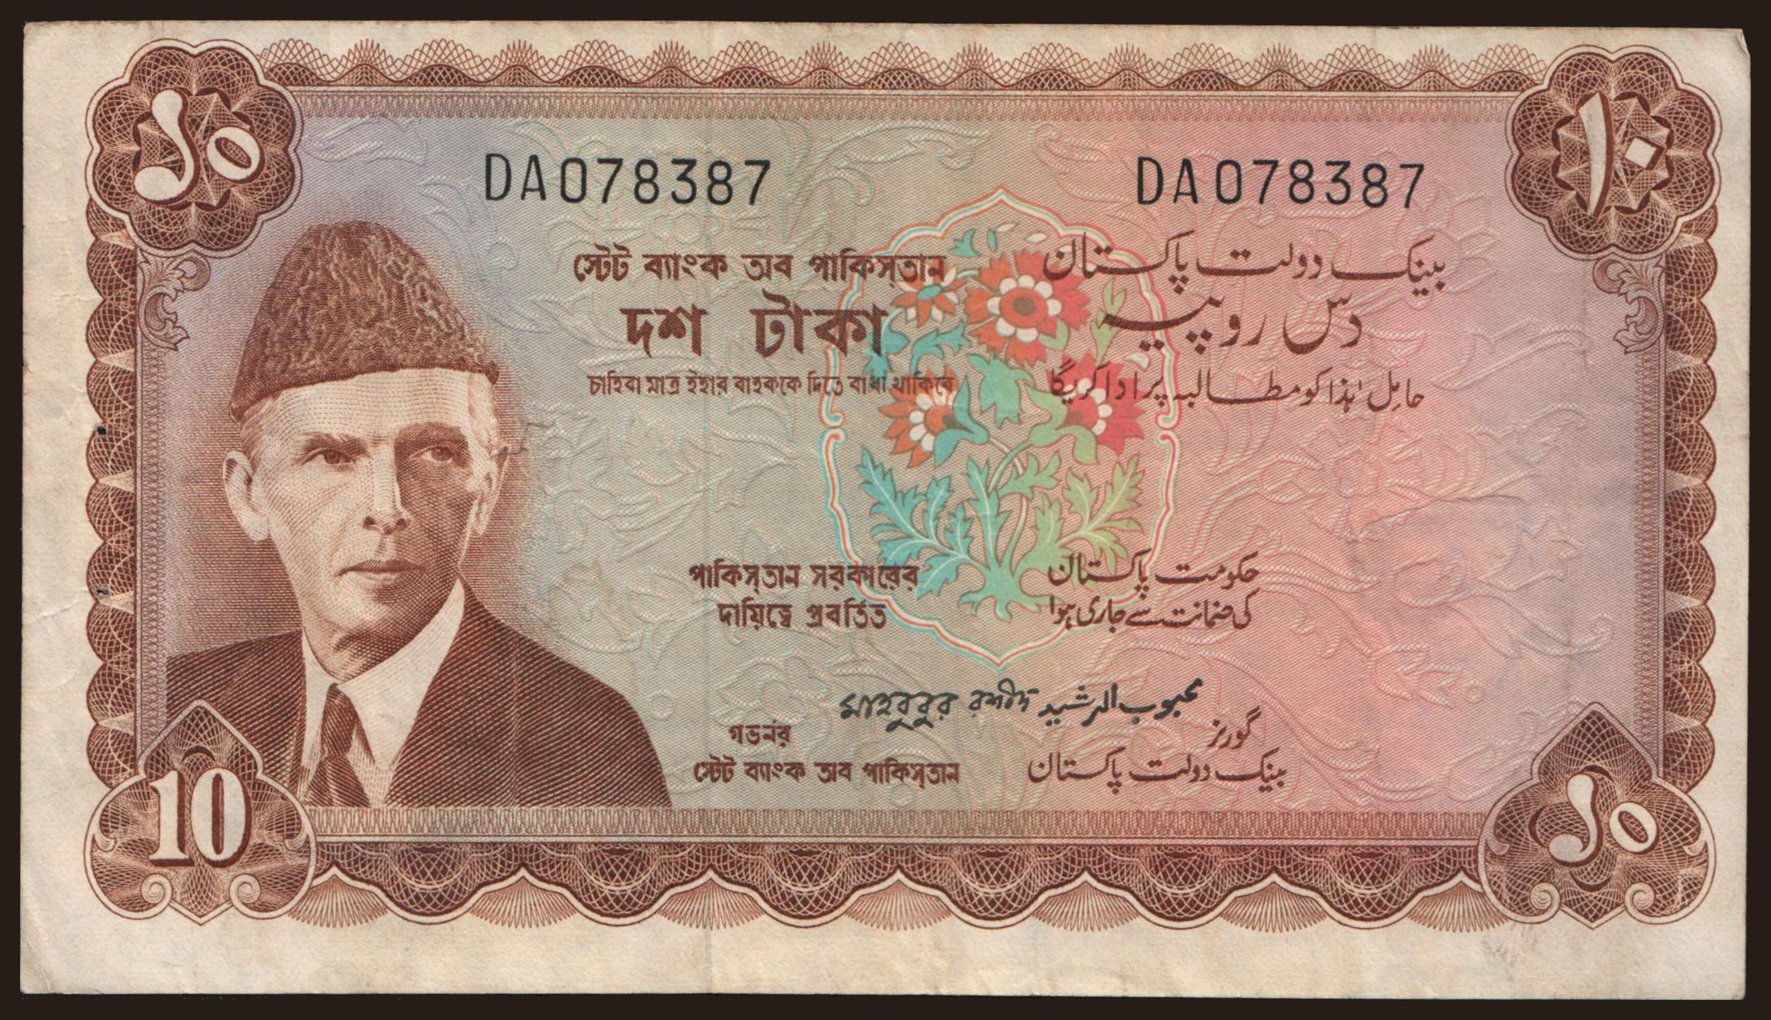 10 rupees, 1970